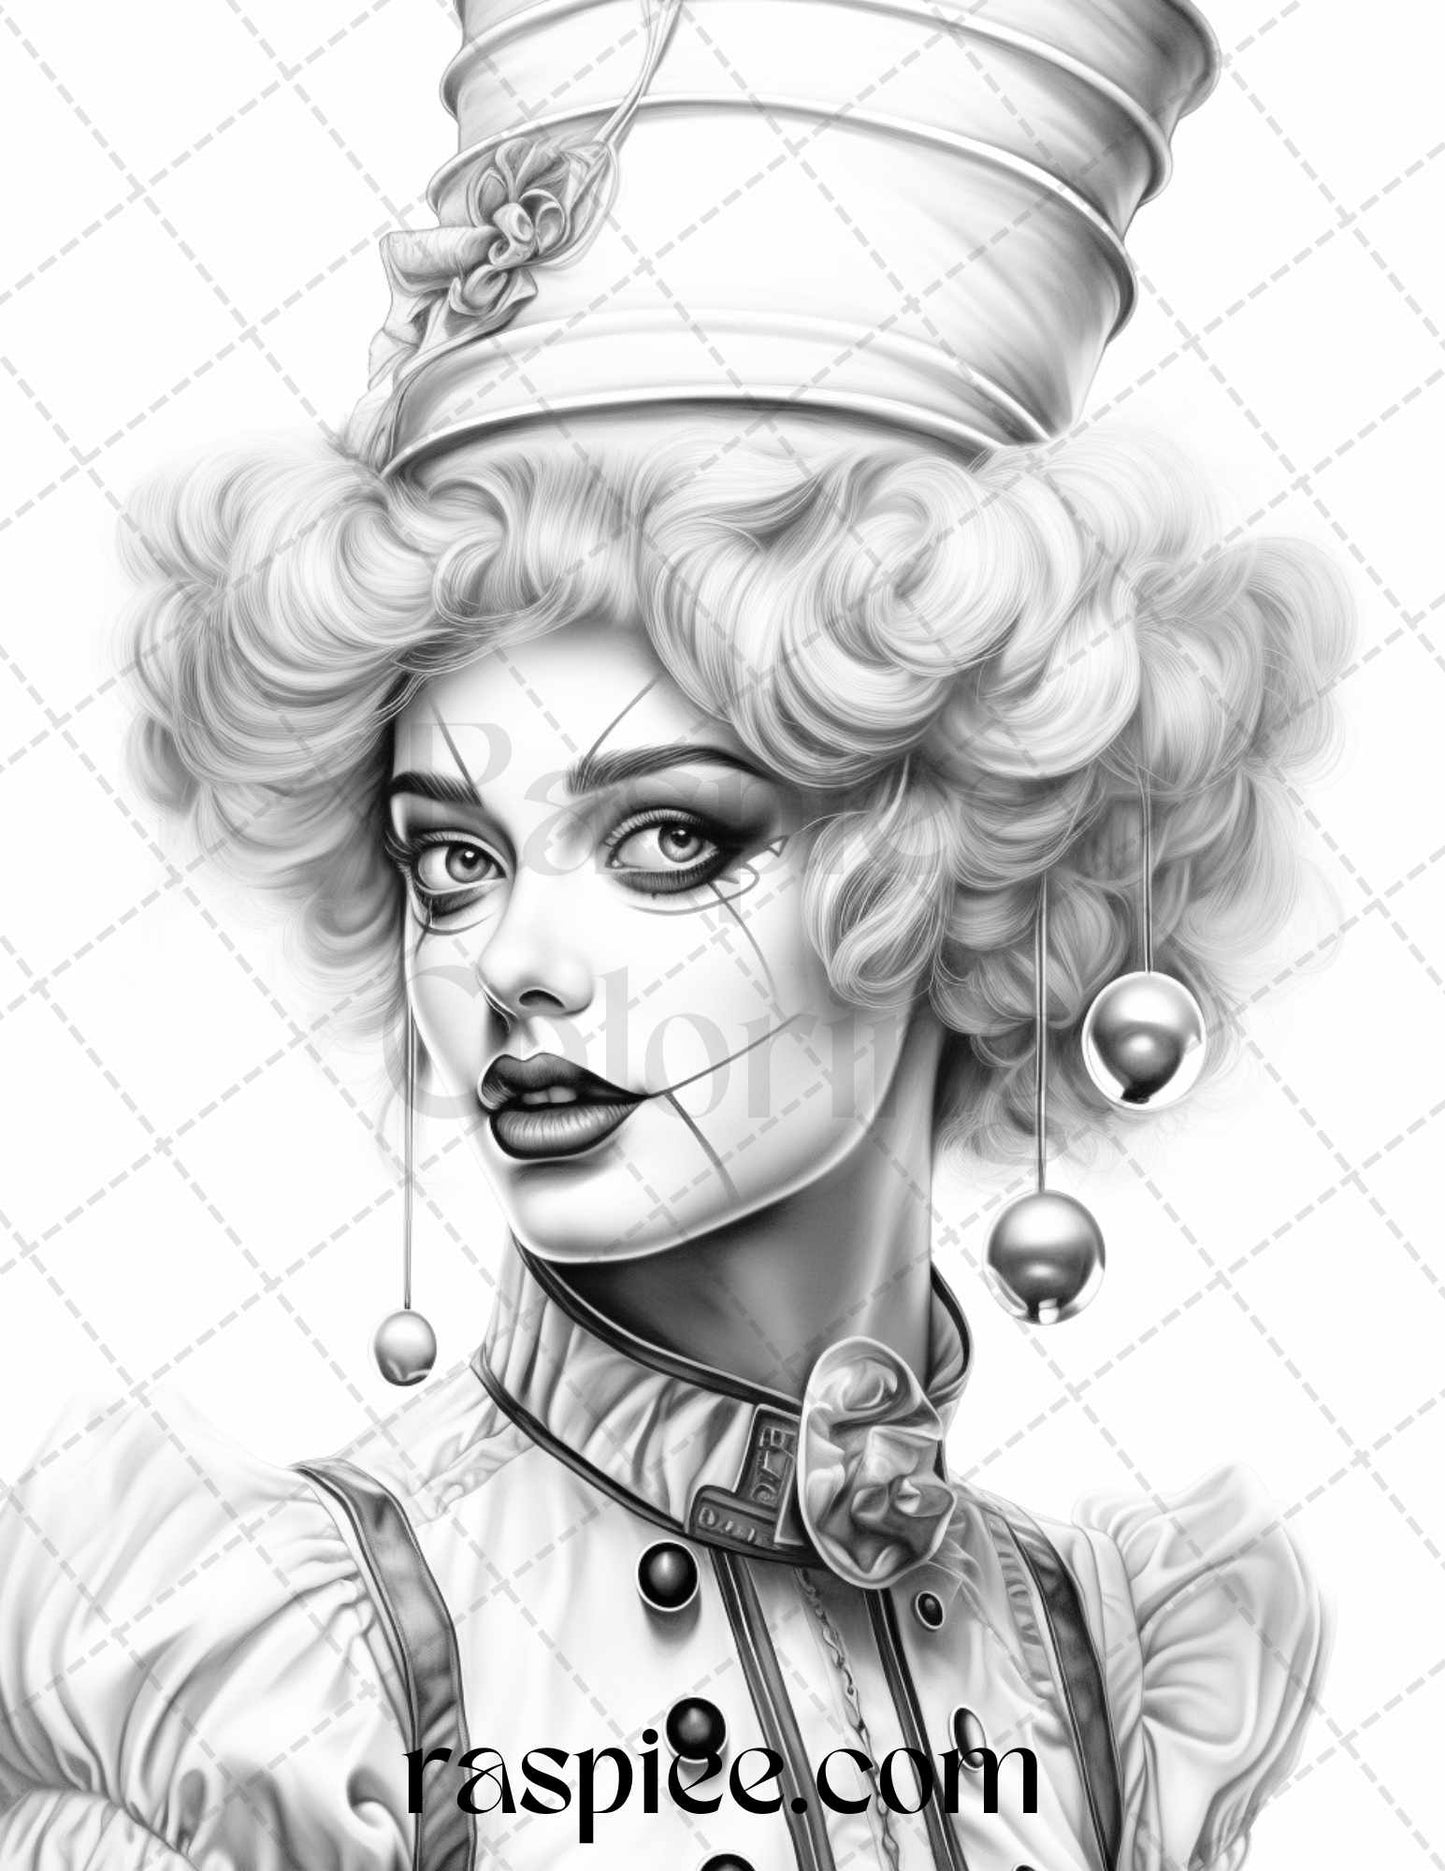 Clown Girls Grayscale Coloring Pages for Adults, Printable Clown Girls Coloring Book, High-Quality Grayscale Printable Art, Adult Coloring Book Instant Download, DIY Grayscale Coloring for Stress Relief, Portrait Coloring Pages for Adults, Portrait Grayscale Coloring Pages